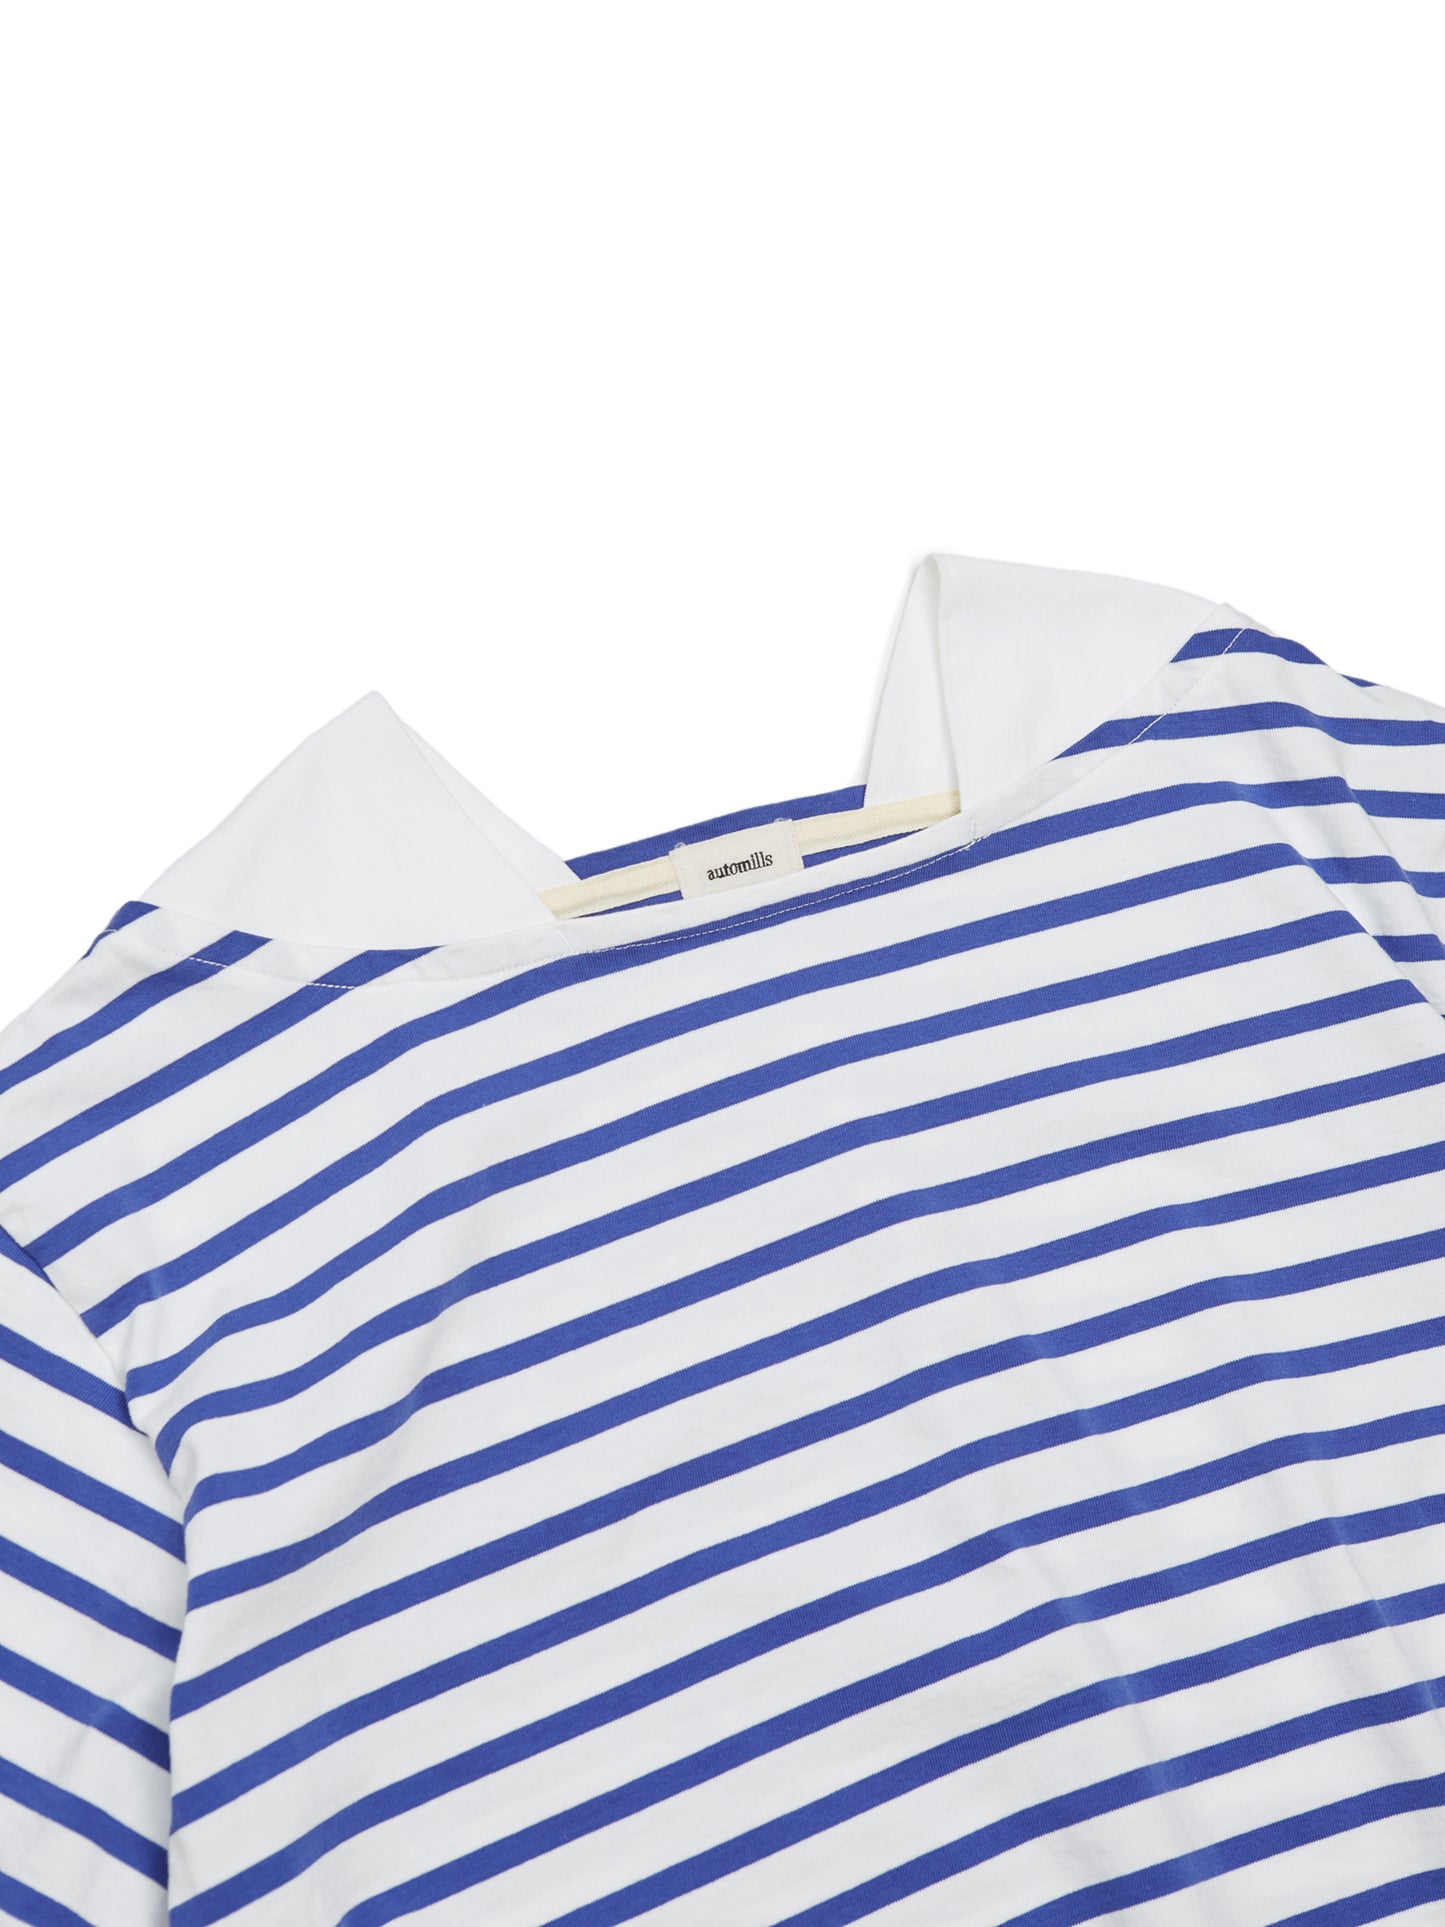 BAGGY BOAT S/S TEE COTTON BORDER JERSEY AM-C0202 White/Blue